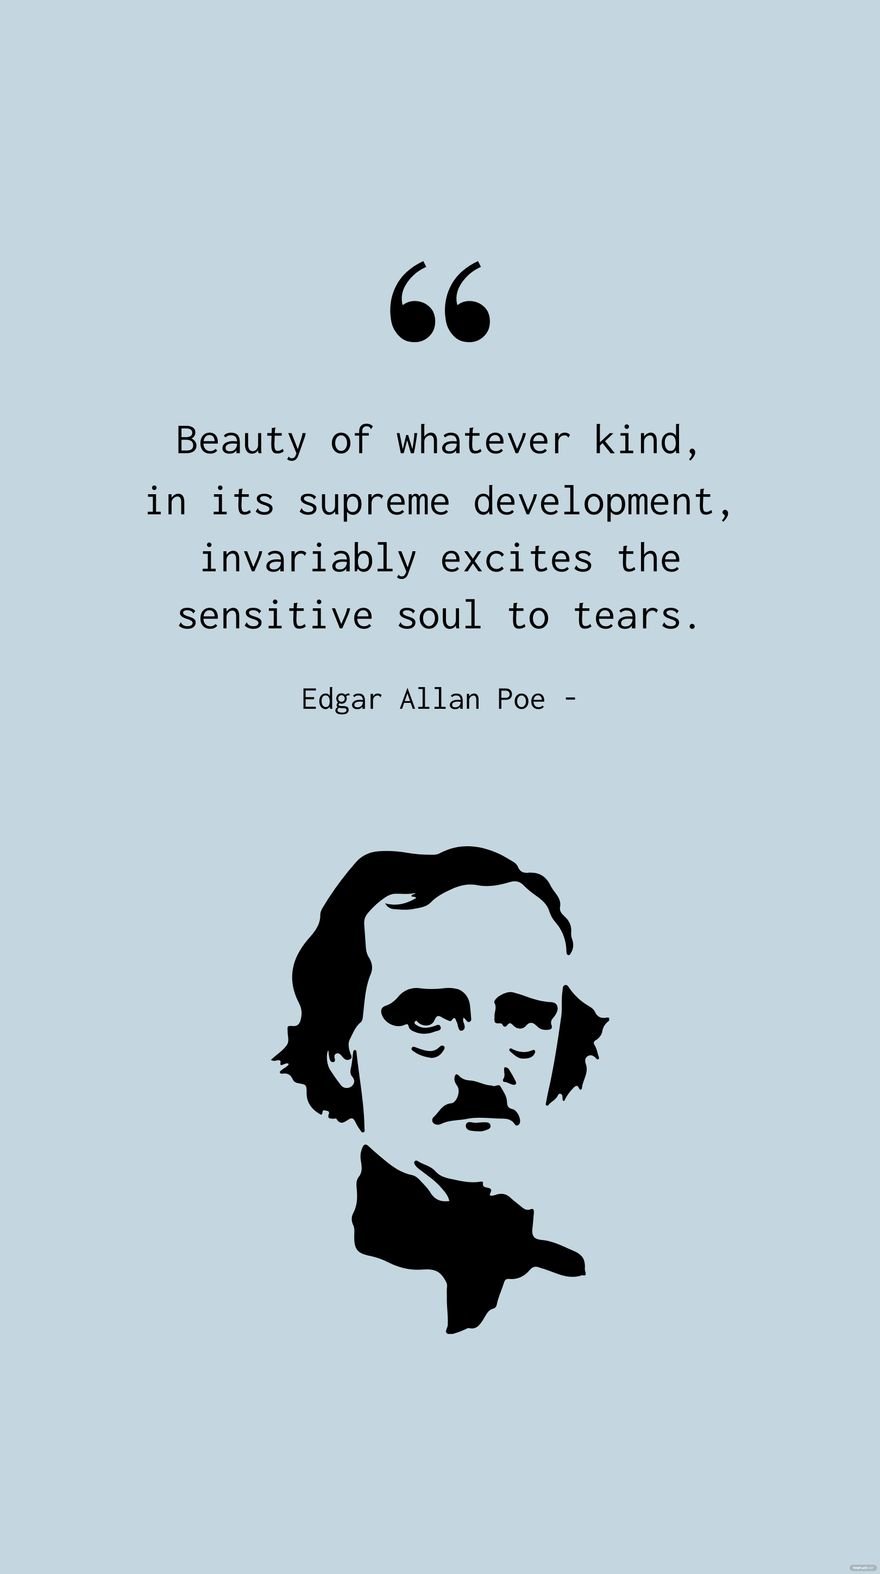 Free Edgar Allan Poe - Beauty of whatever kind, in its supreme development, invariably excites the sensitive soul to tears. in JPG